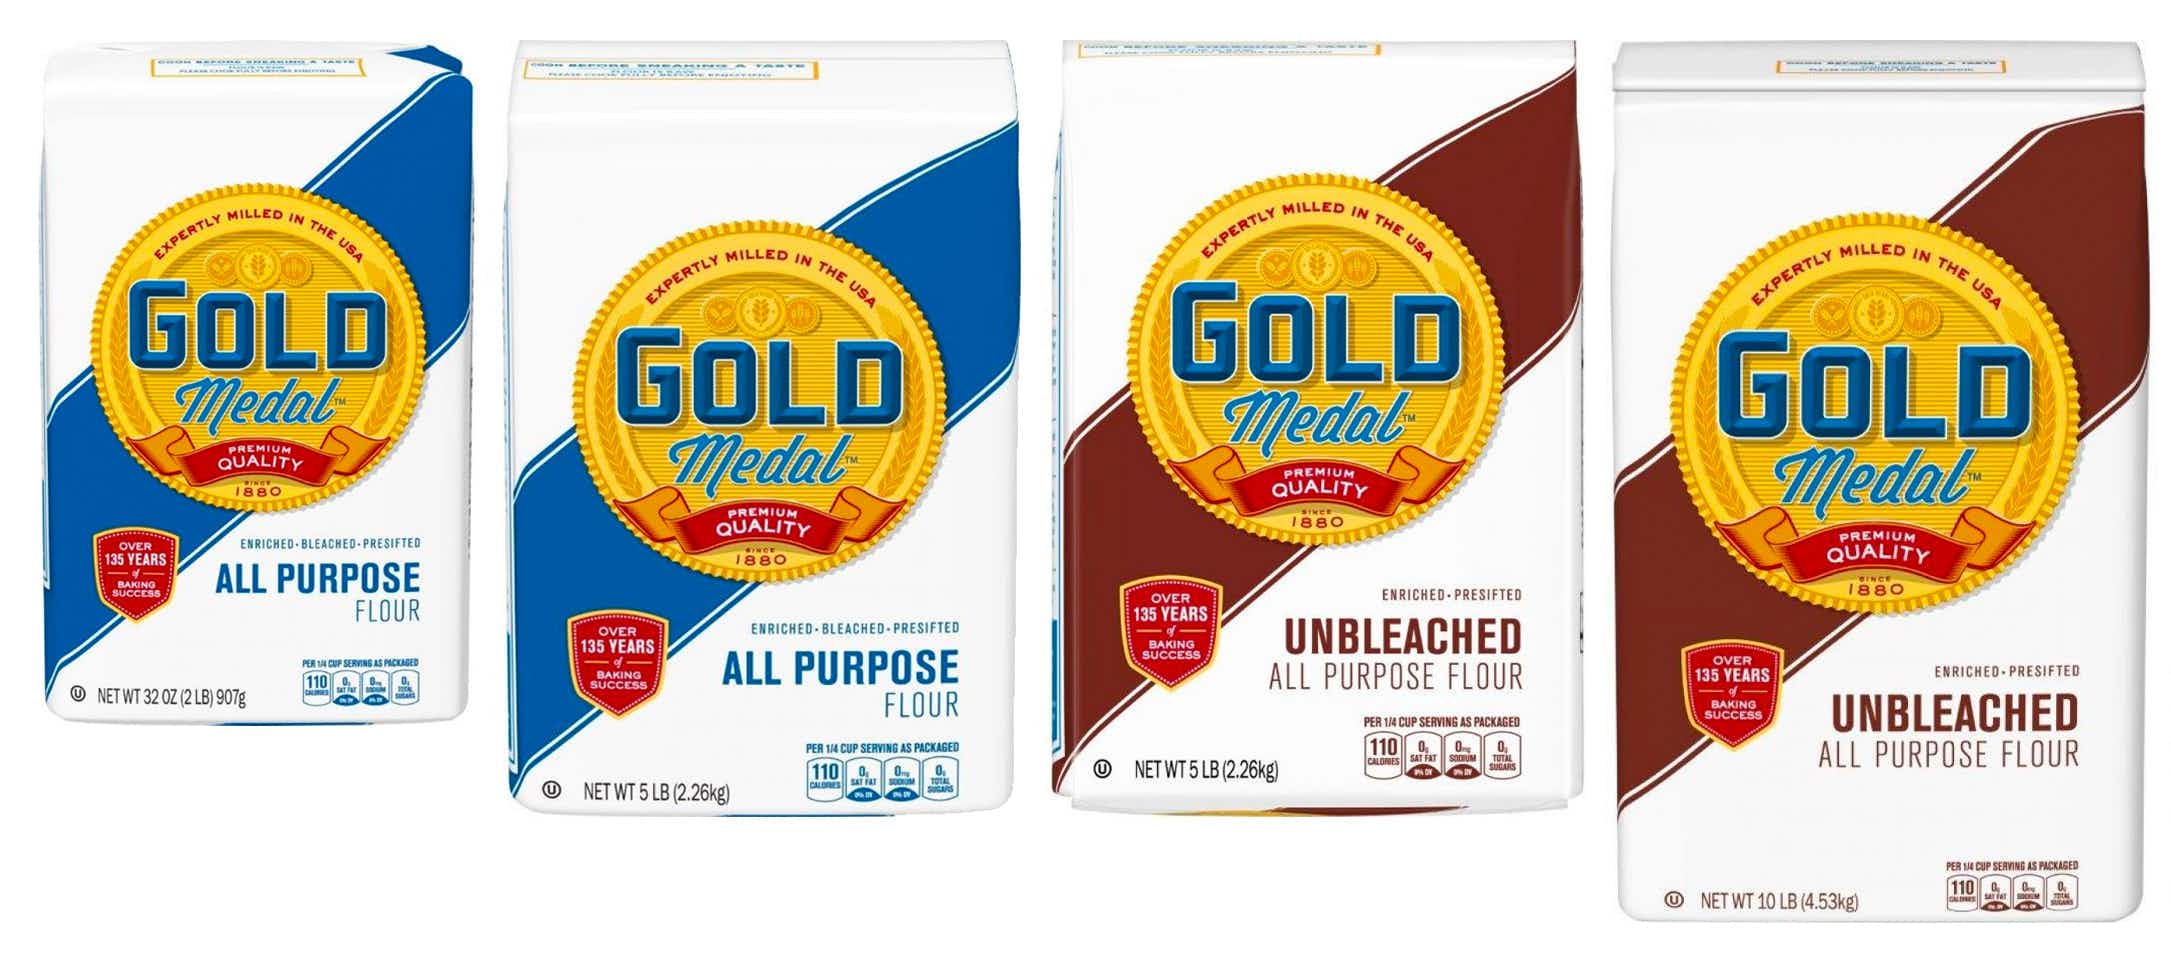 The Gold Medal flour products that are part of a salmonella recall